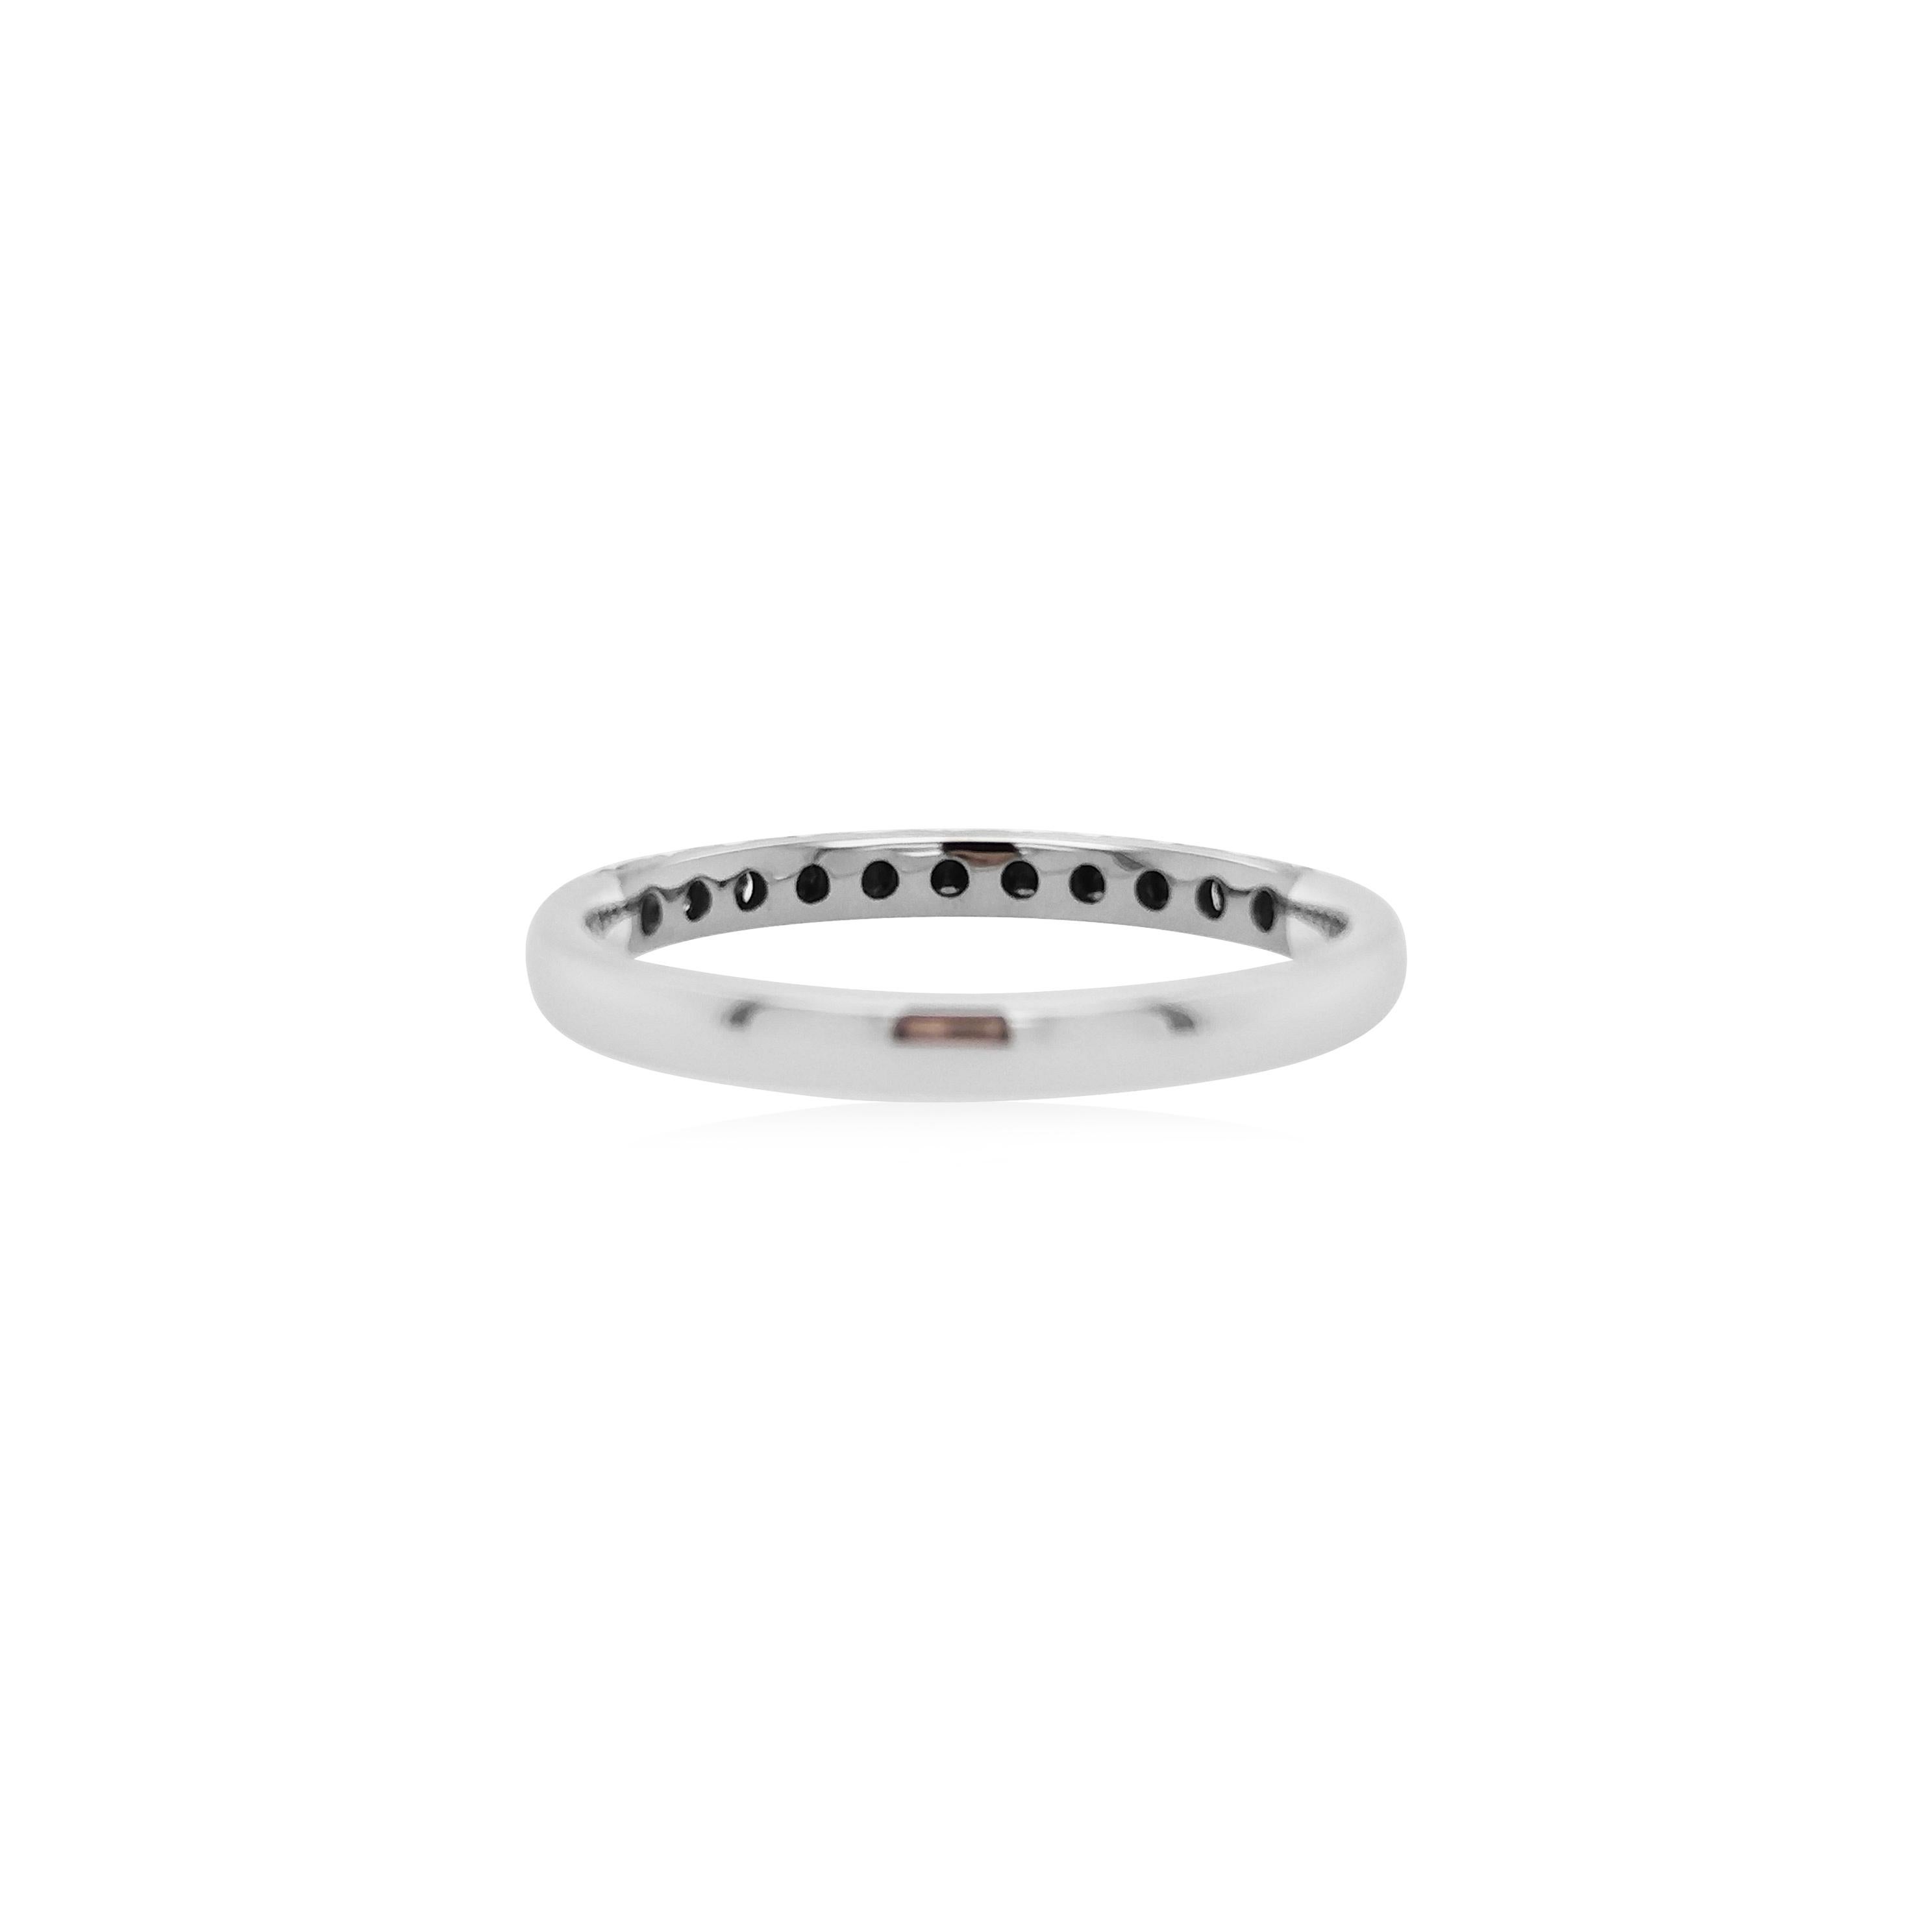 A simple yet elegant ring with black diamonds to add a unique style to your everyday look.

Black Diamonds- 0.41 cts
Made in 18K White gold

HYT Jewelry is a privately owned company headquartered in Hong Kong, with branches in Tokyo, New York, and